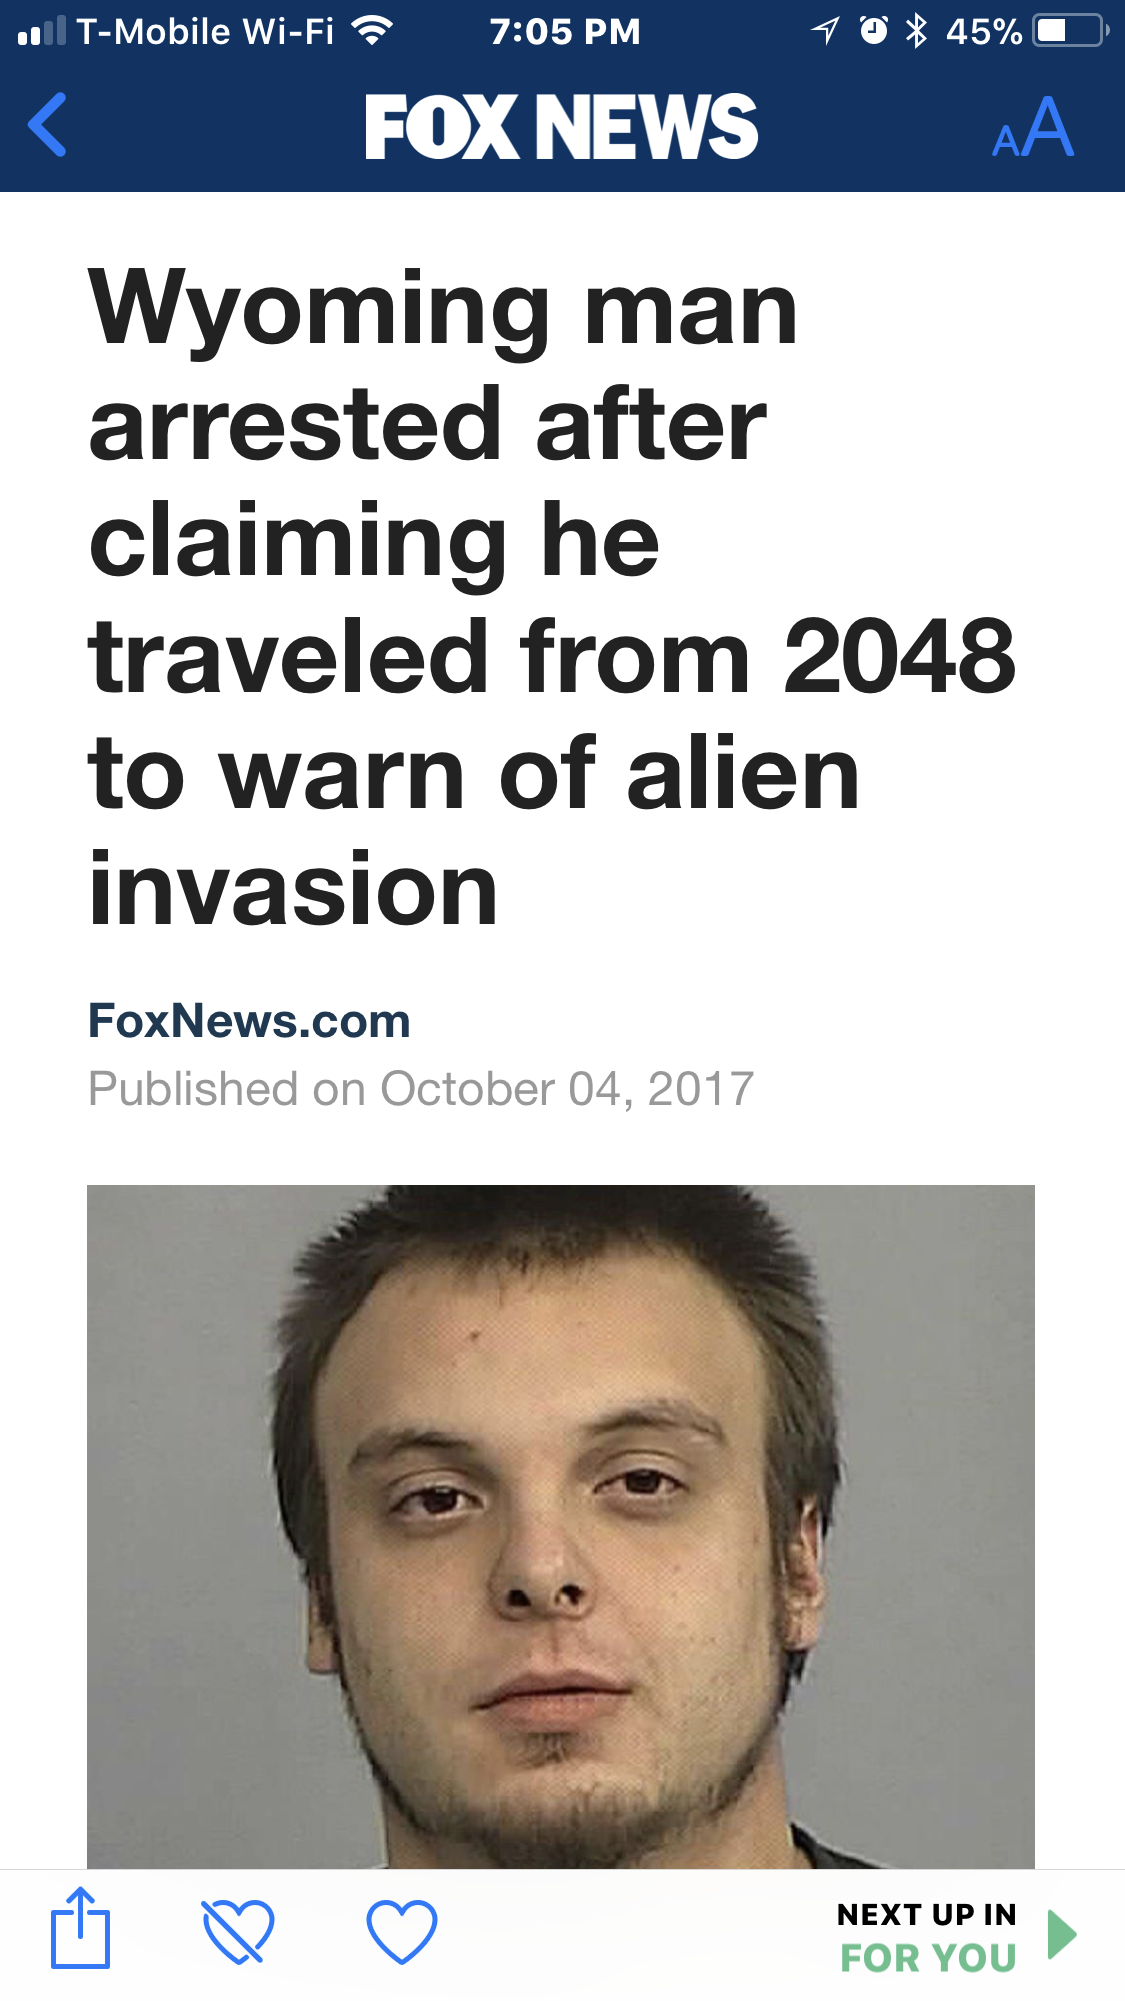 funny offensive memes 2017 - TMobile WiFi Fox News 10 45% Aa Wyoming man arrested after claiming he traveled from 2048 to warn of alien invasion FoxNews.com Published on